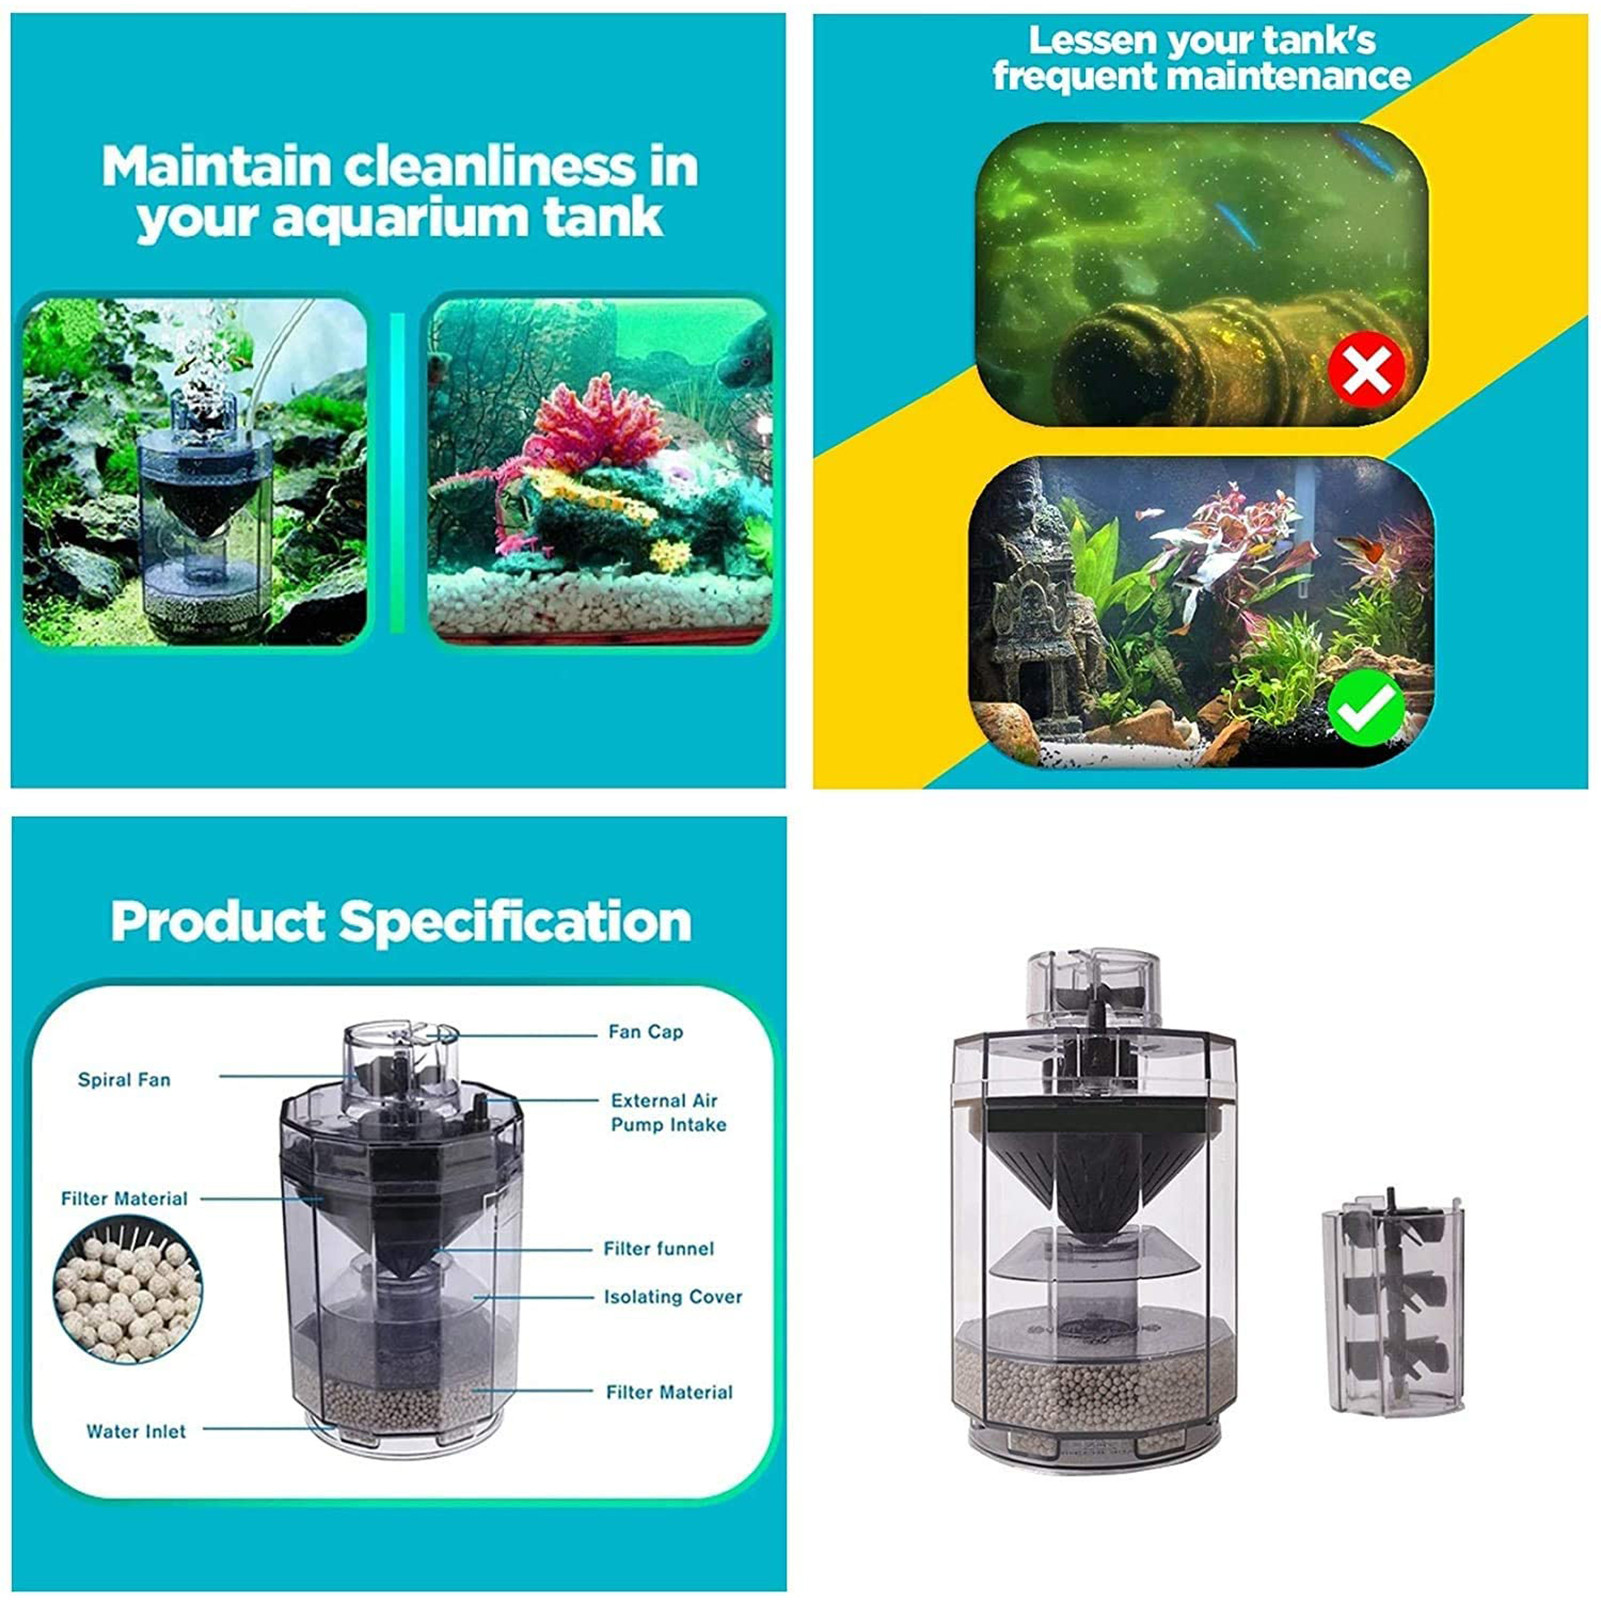 Multi-Stage Aquarium Filter System Cleaning Fish Tank Household